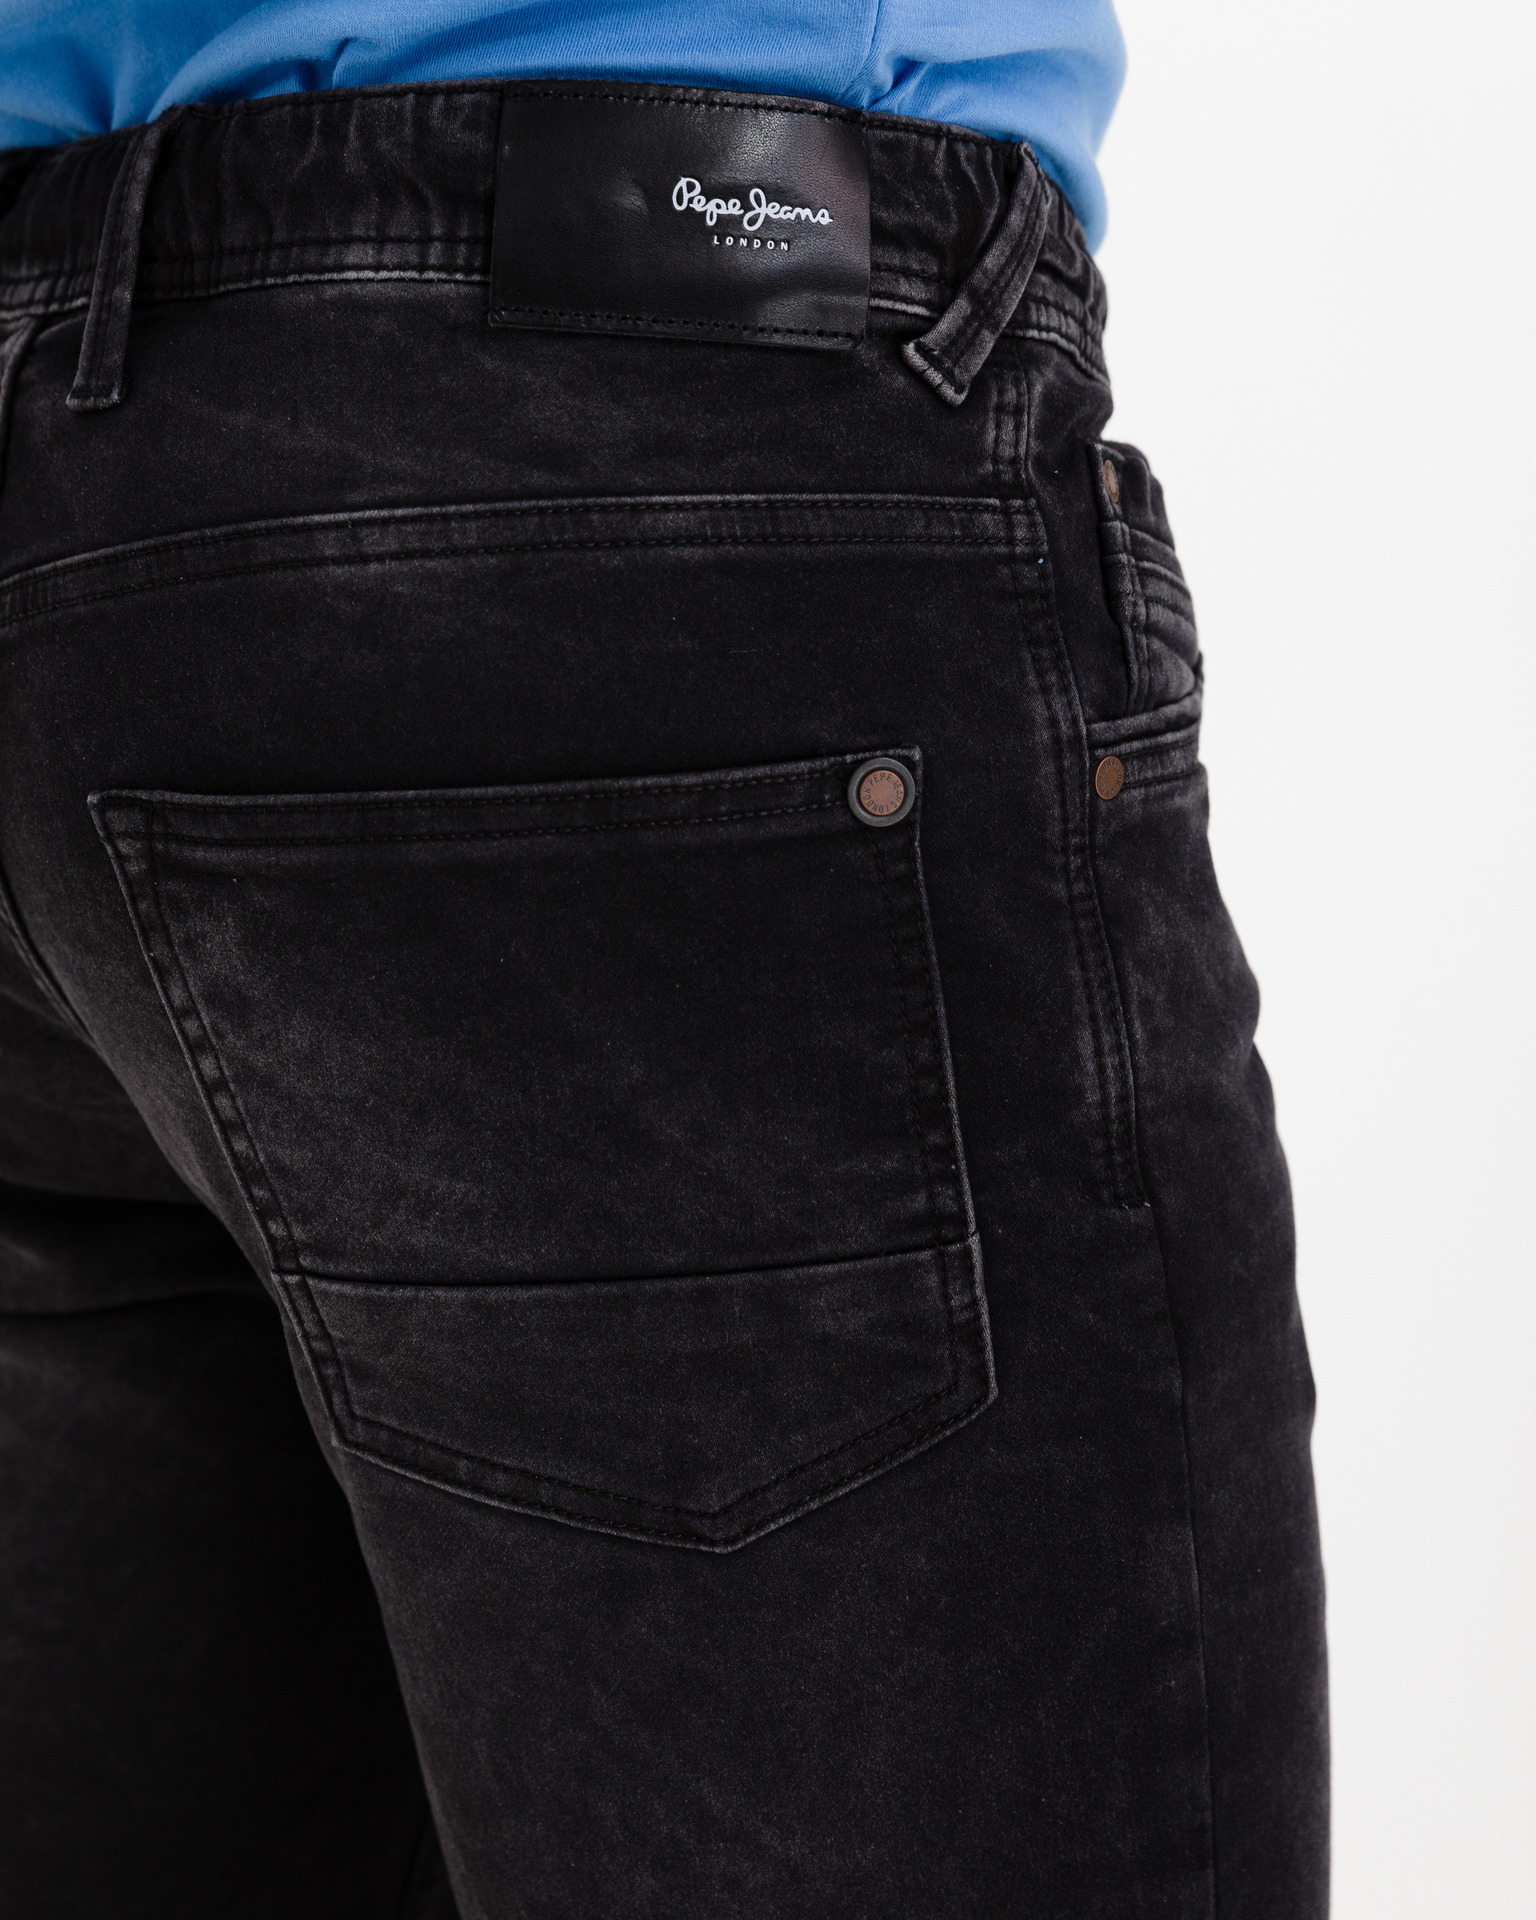 Pepe Jeans Trousers  Buy Pepe Jeans Trousers online in India